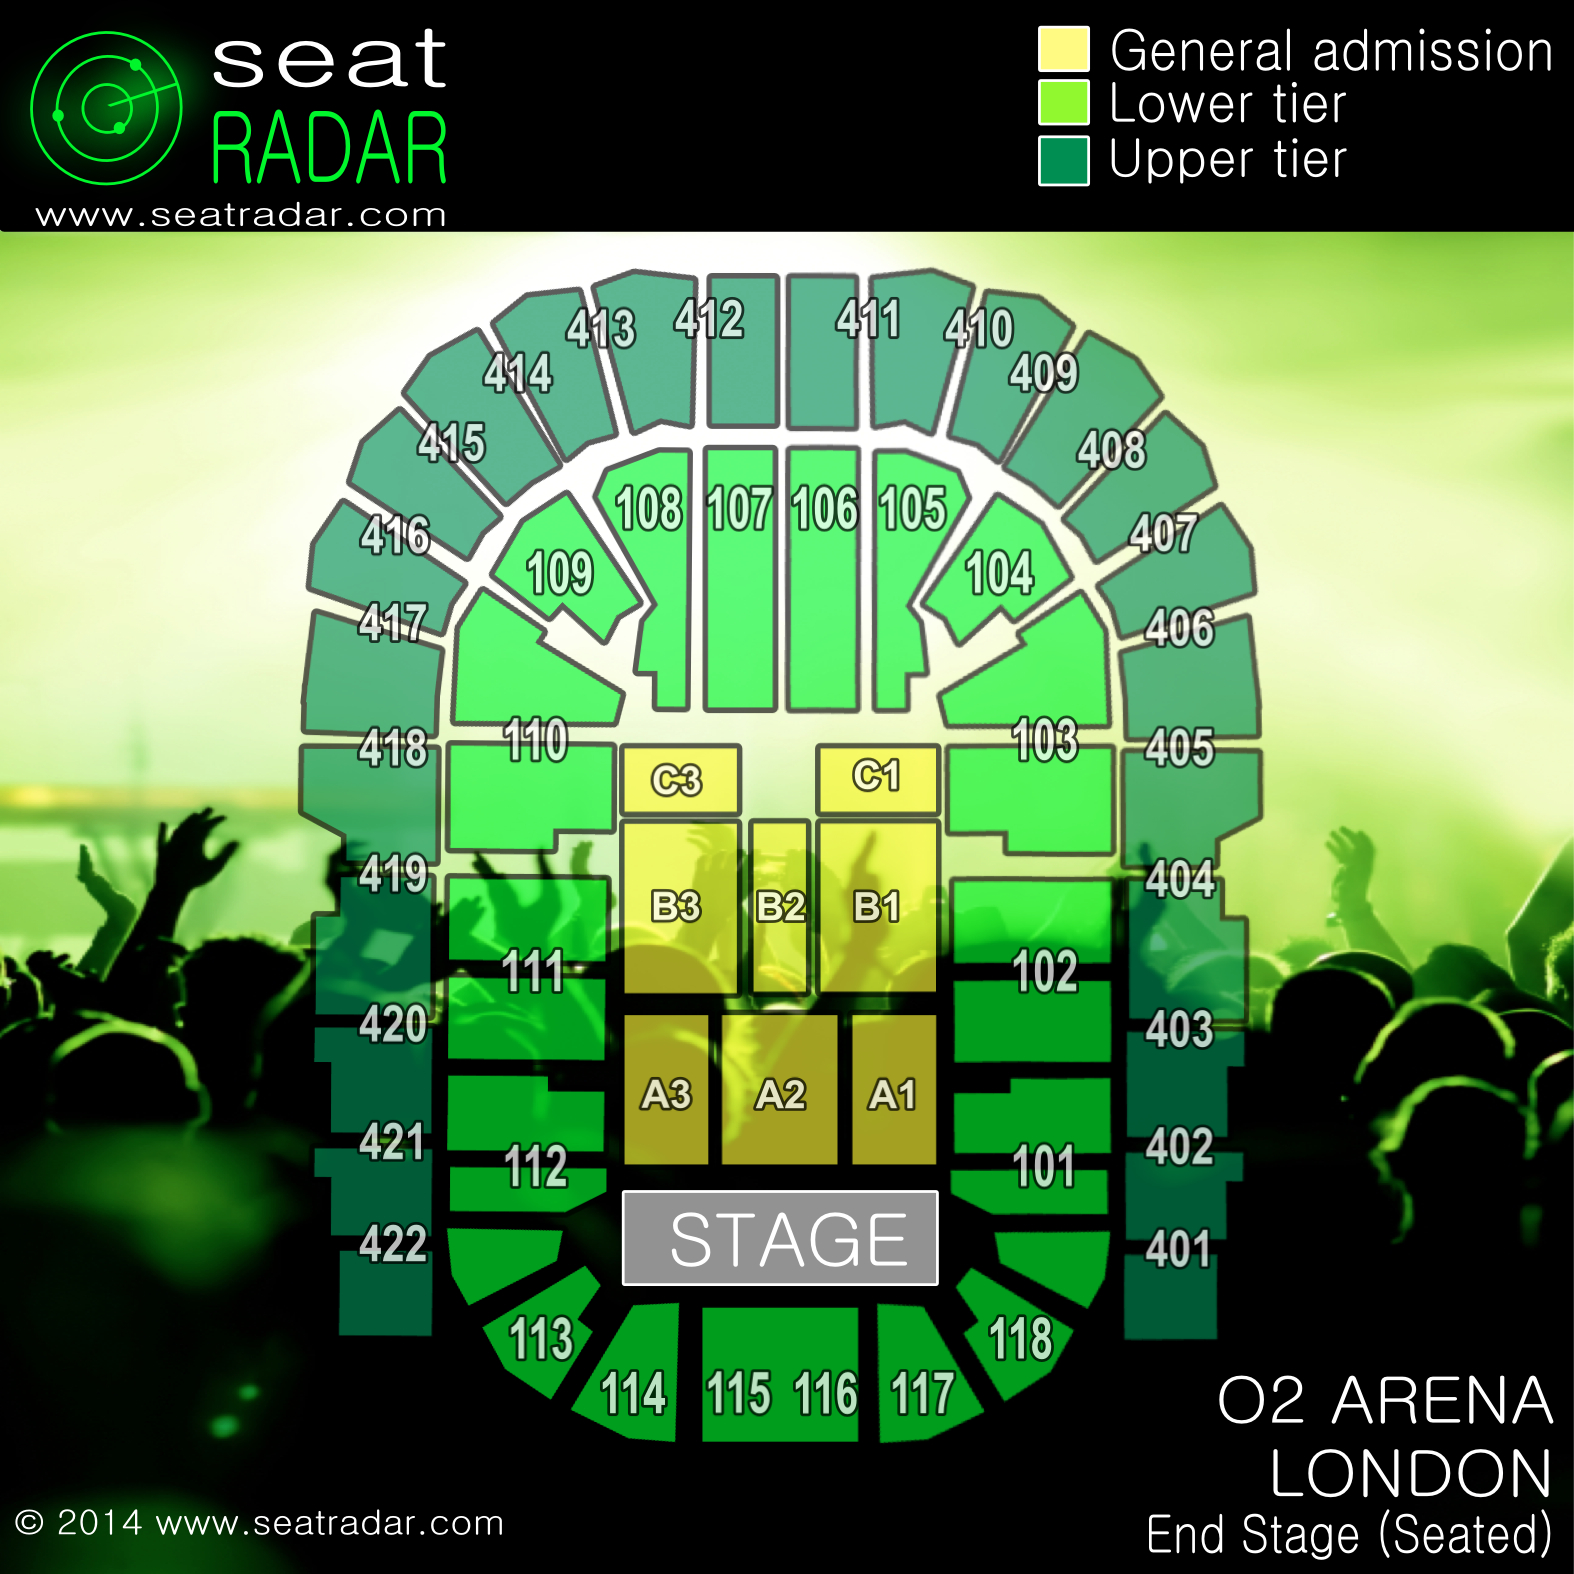 O2 Arena, London - End Stage (Seated)